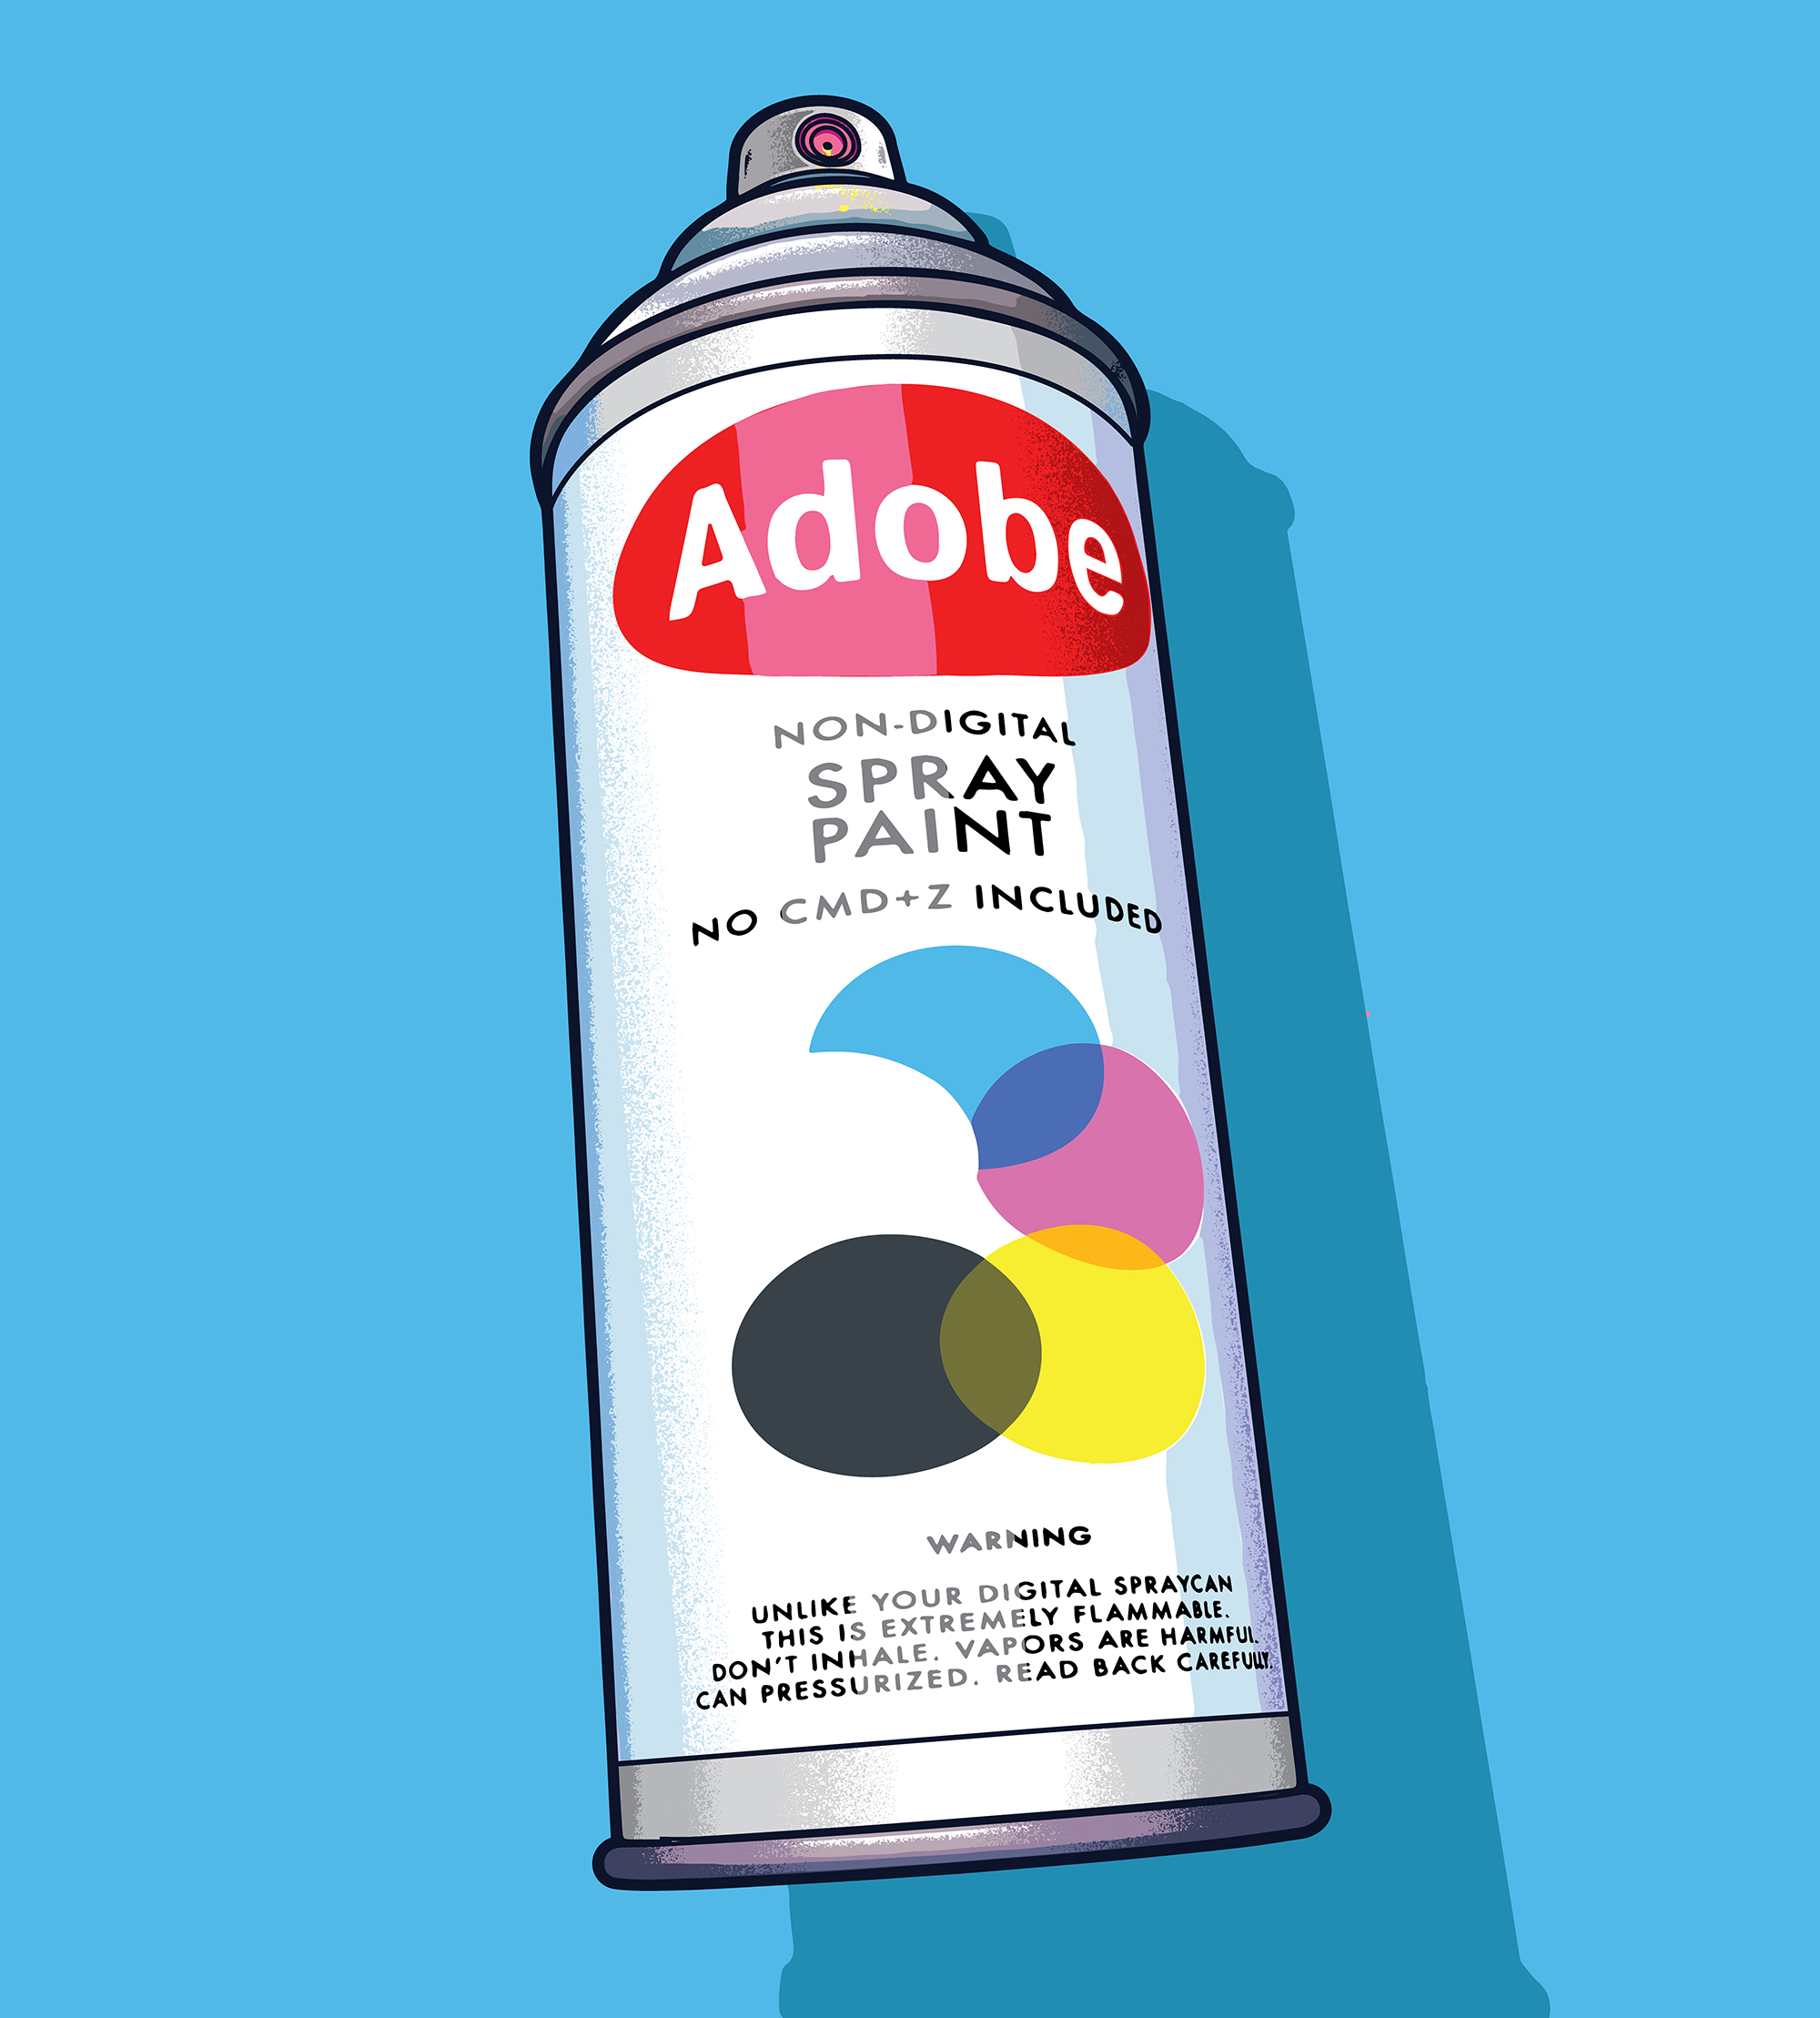 Adobe Spray Paint From The 90s By Bert Musketon